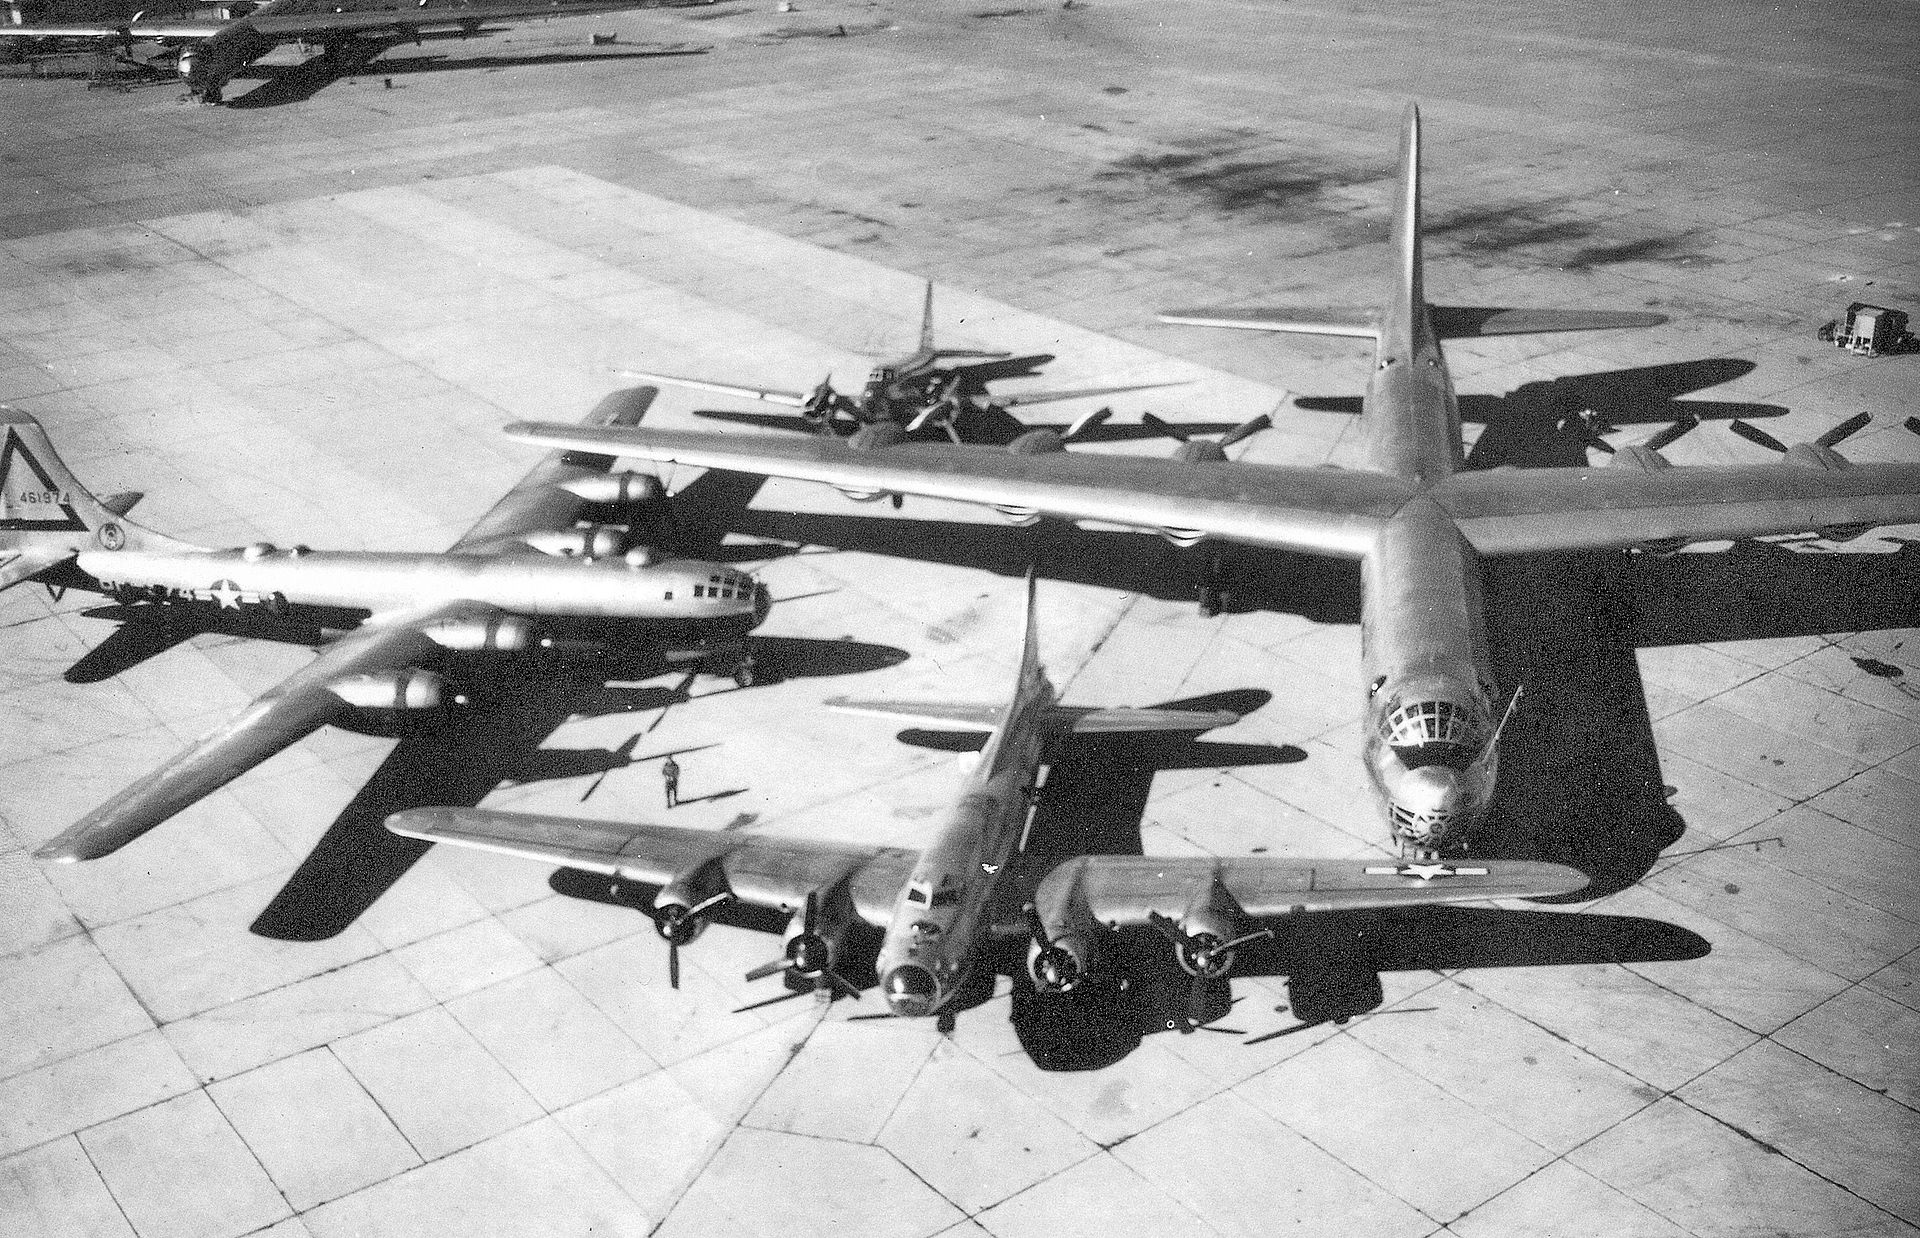 A Douglas B-18 Bolo, a Boeing B-17 Flying Fortress, a Boeing B-29 Superfortress and the B-36 Peacemaker dominating the group photo with a 230-foot wingspan.